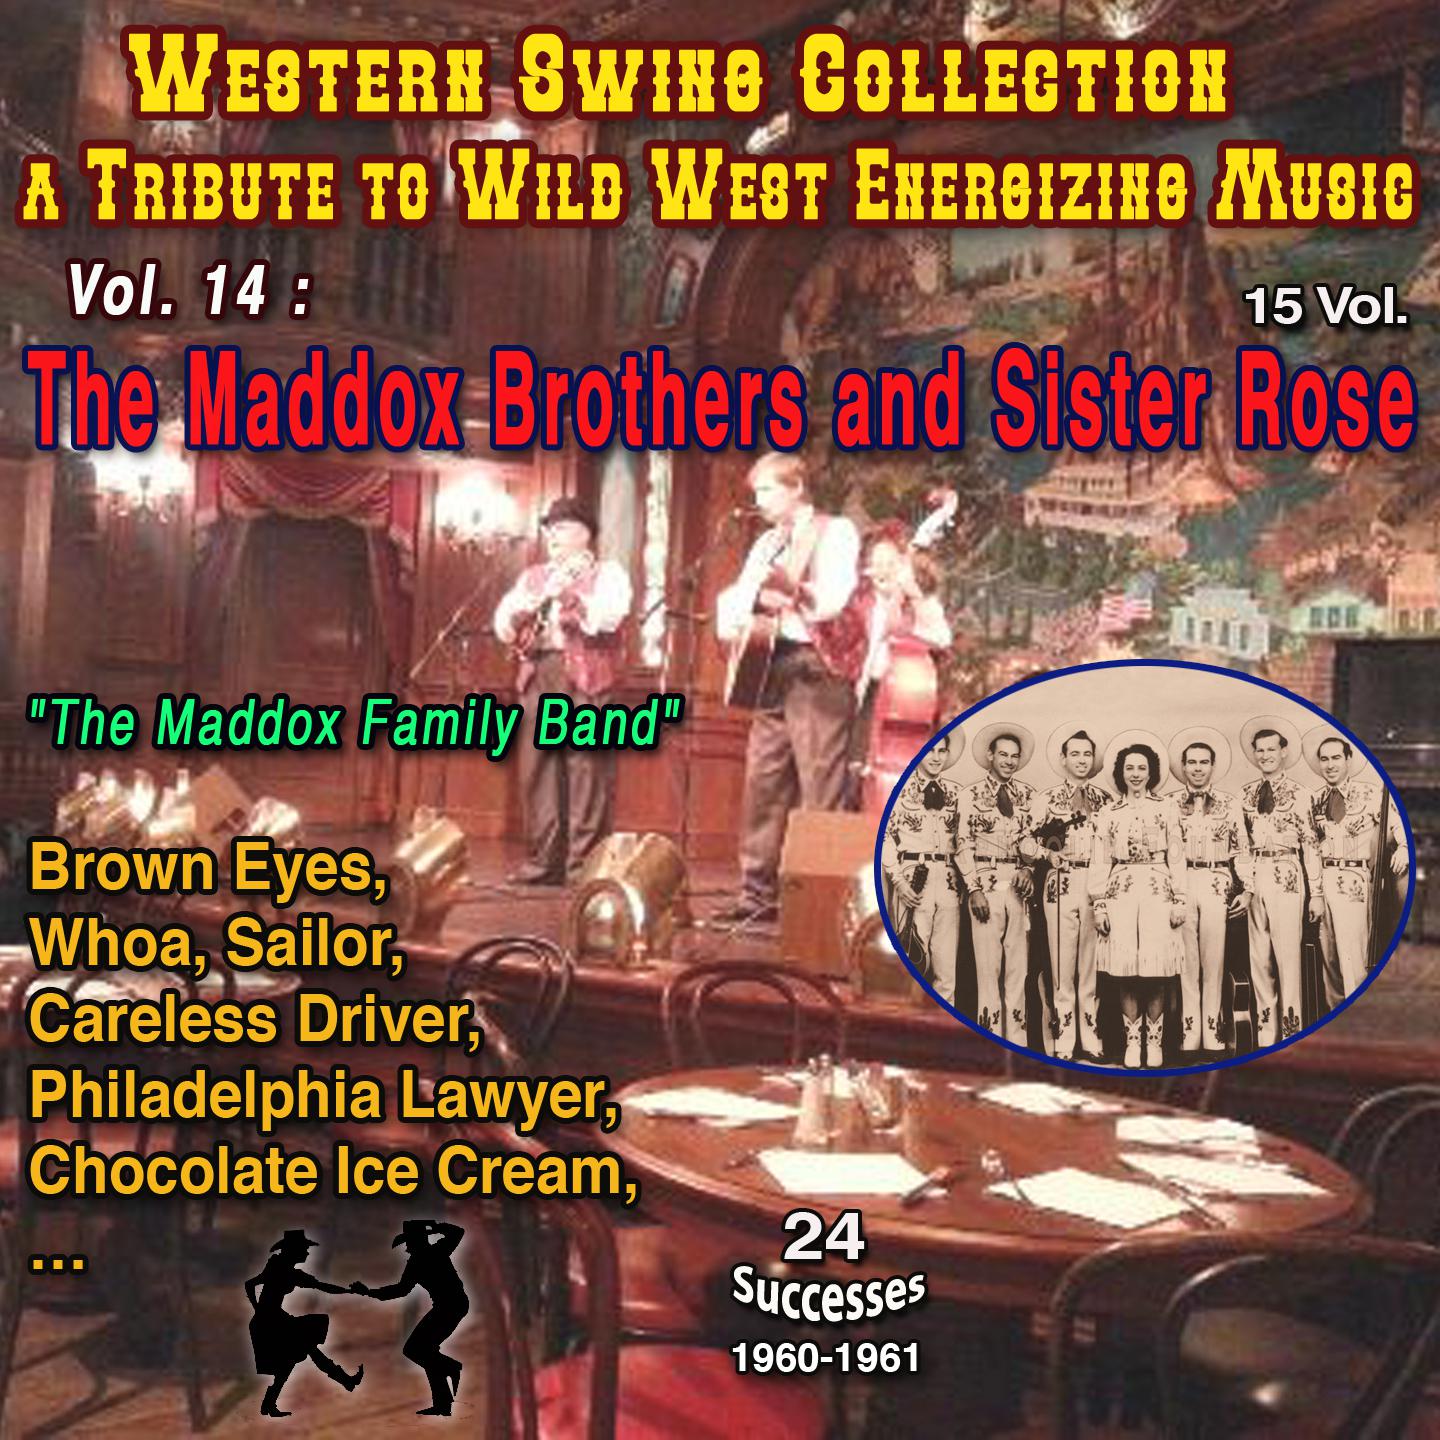 Постер альбома Western Swing Collection : a Tribute to Wild West Energizing Music 15 Vol. Vol. 14 : The Maddox Brothers and Sister Rose "America's most colourful Hillibily Band"